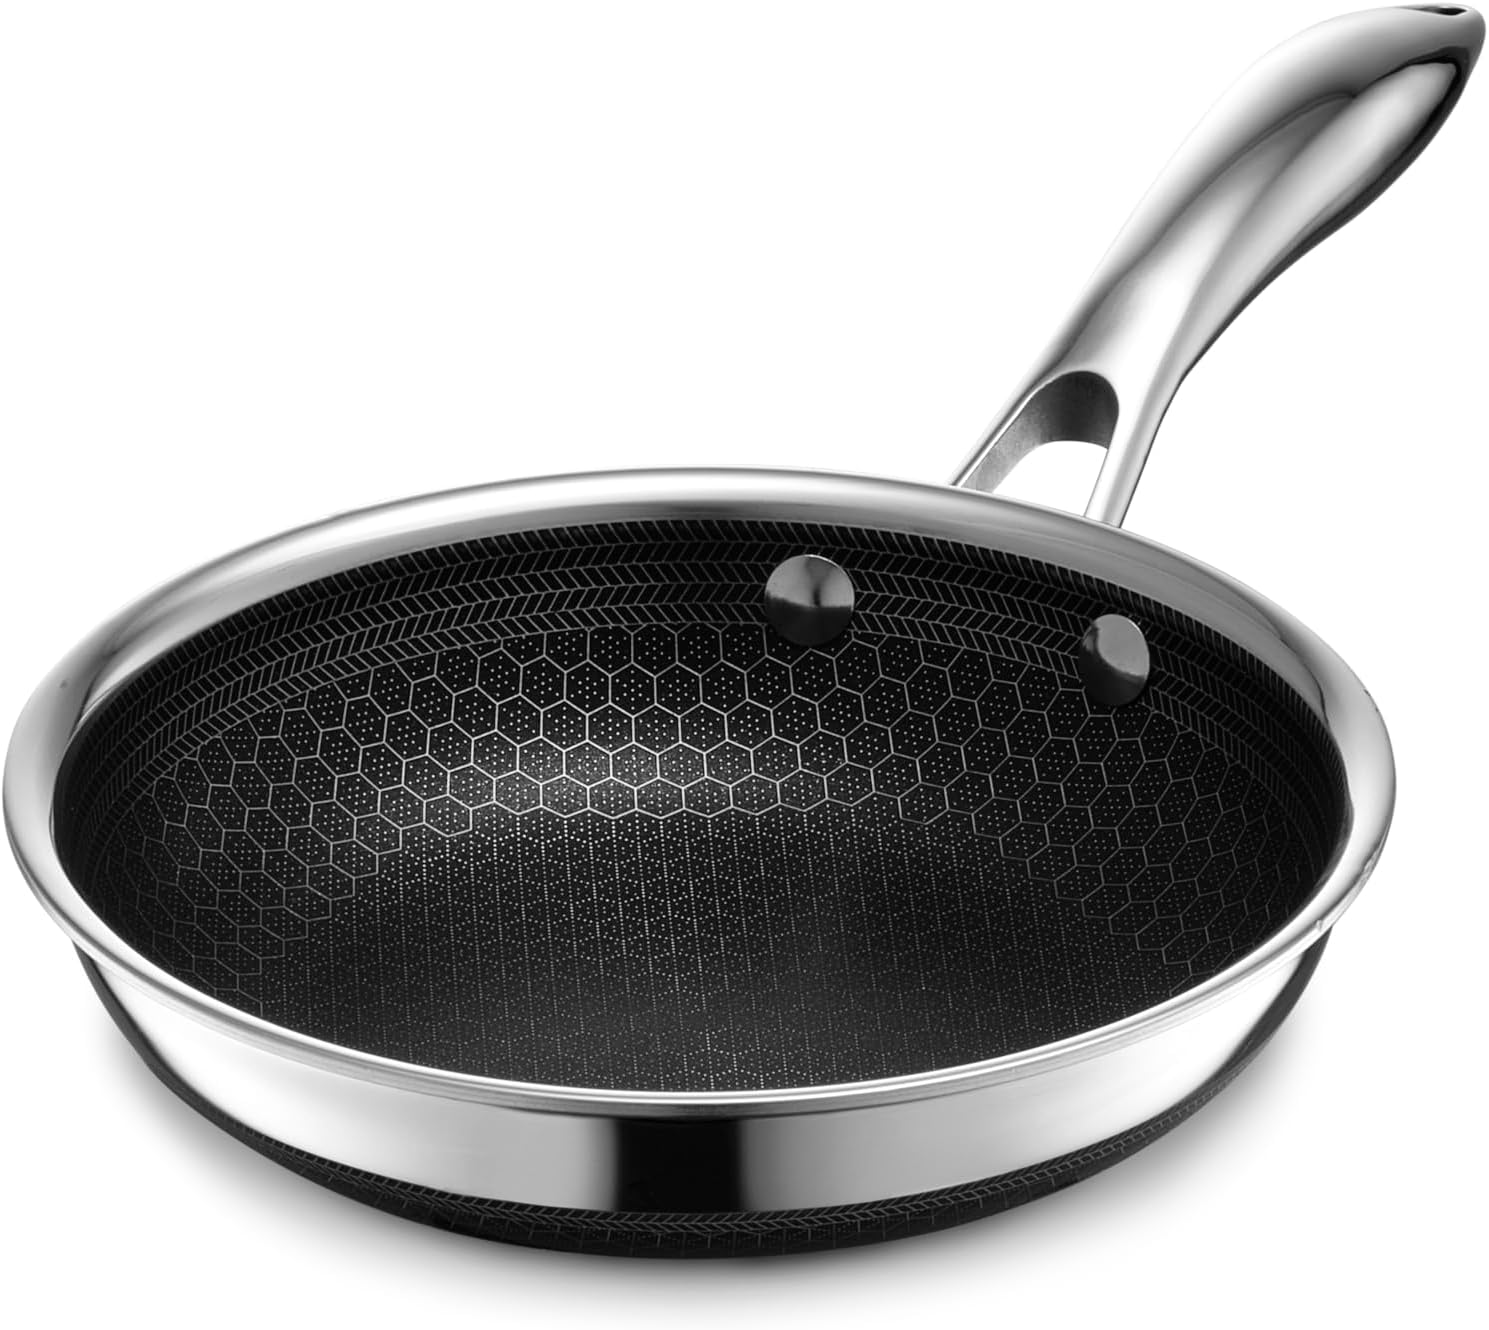 HexClad Hybrid Nonstick 7-Inch Fry Pan, Stay-Cool Handle